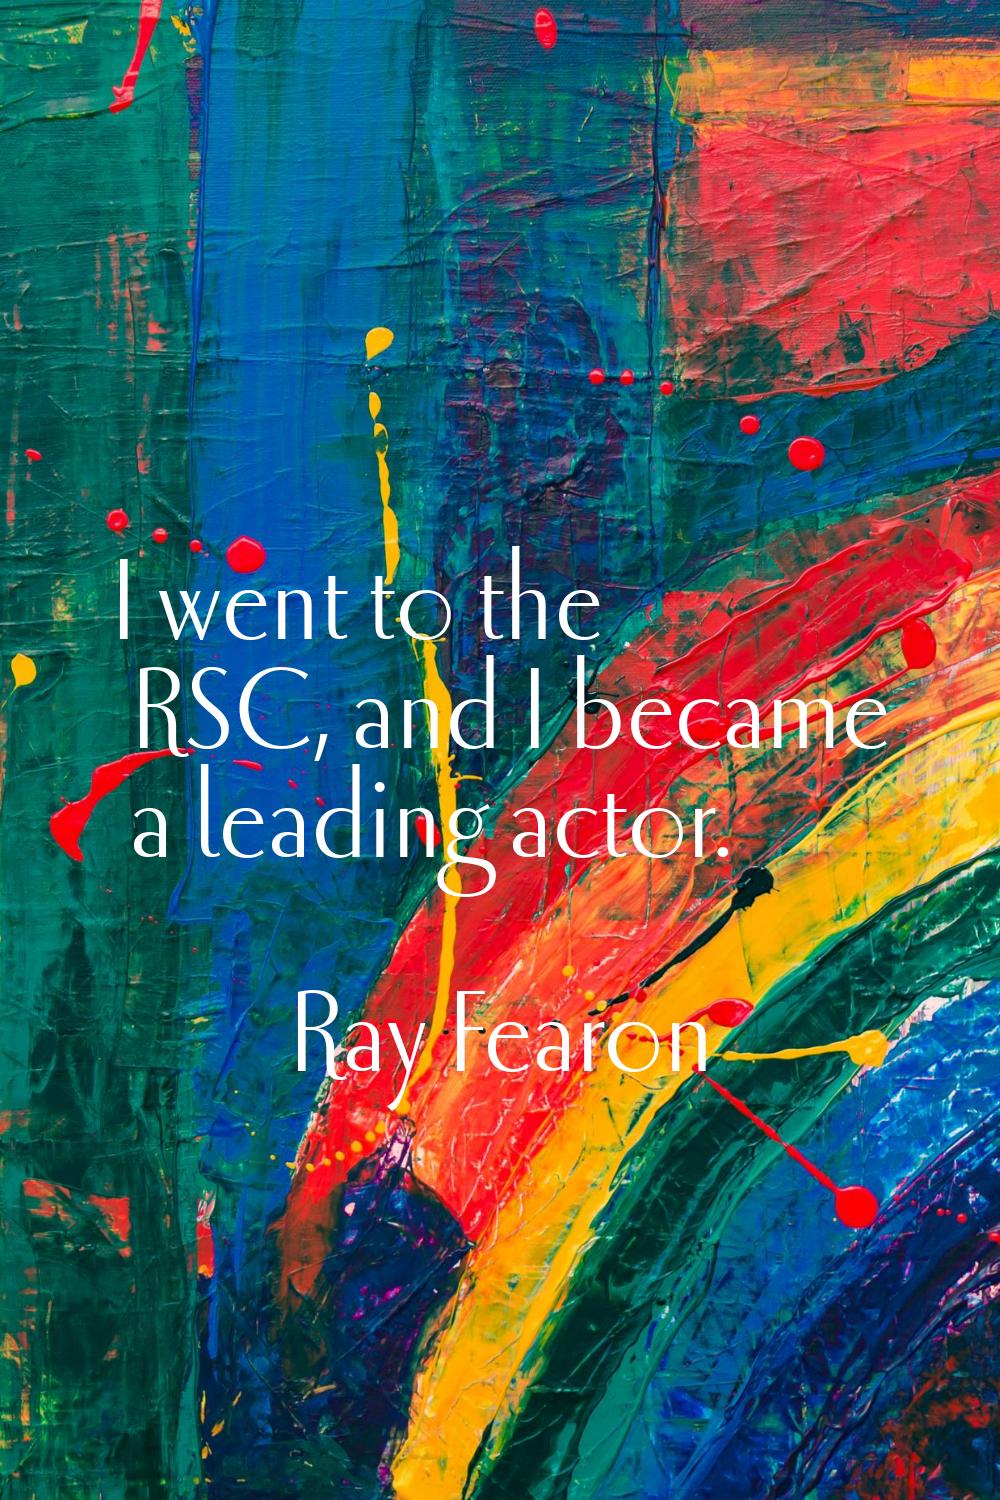 I went to the RSC, and I became a leading actor.